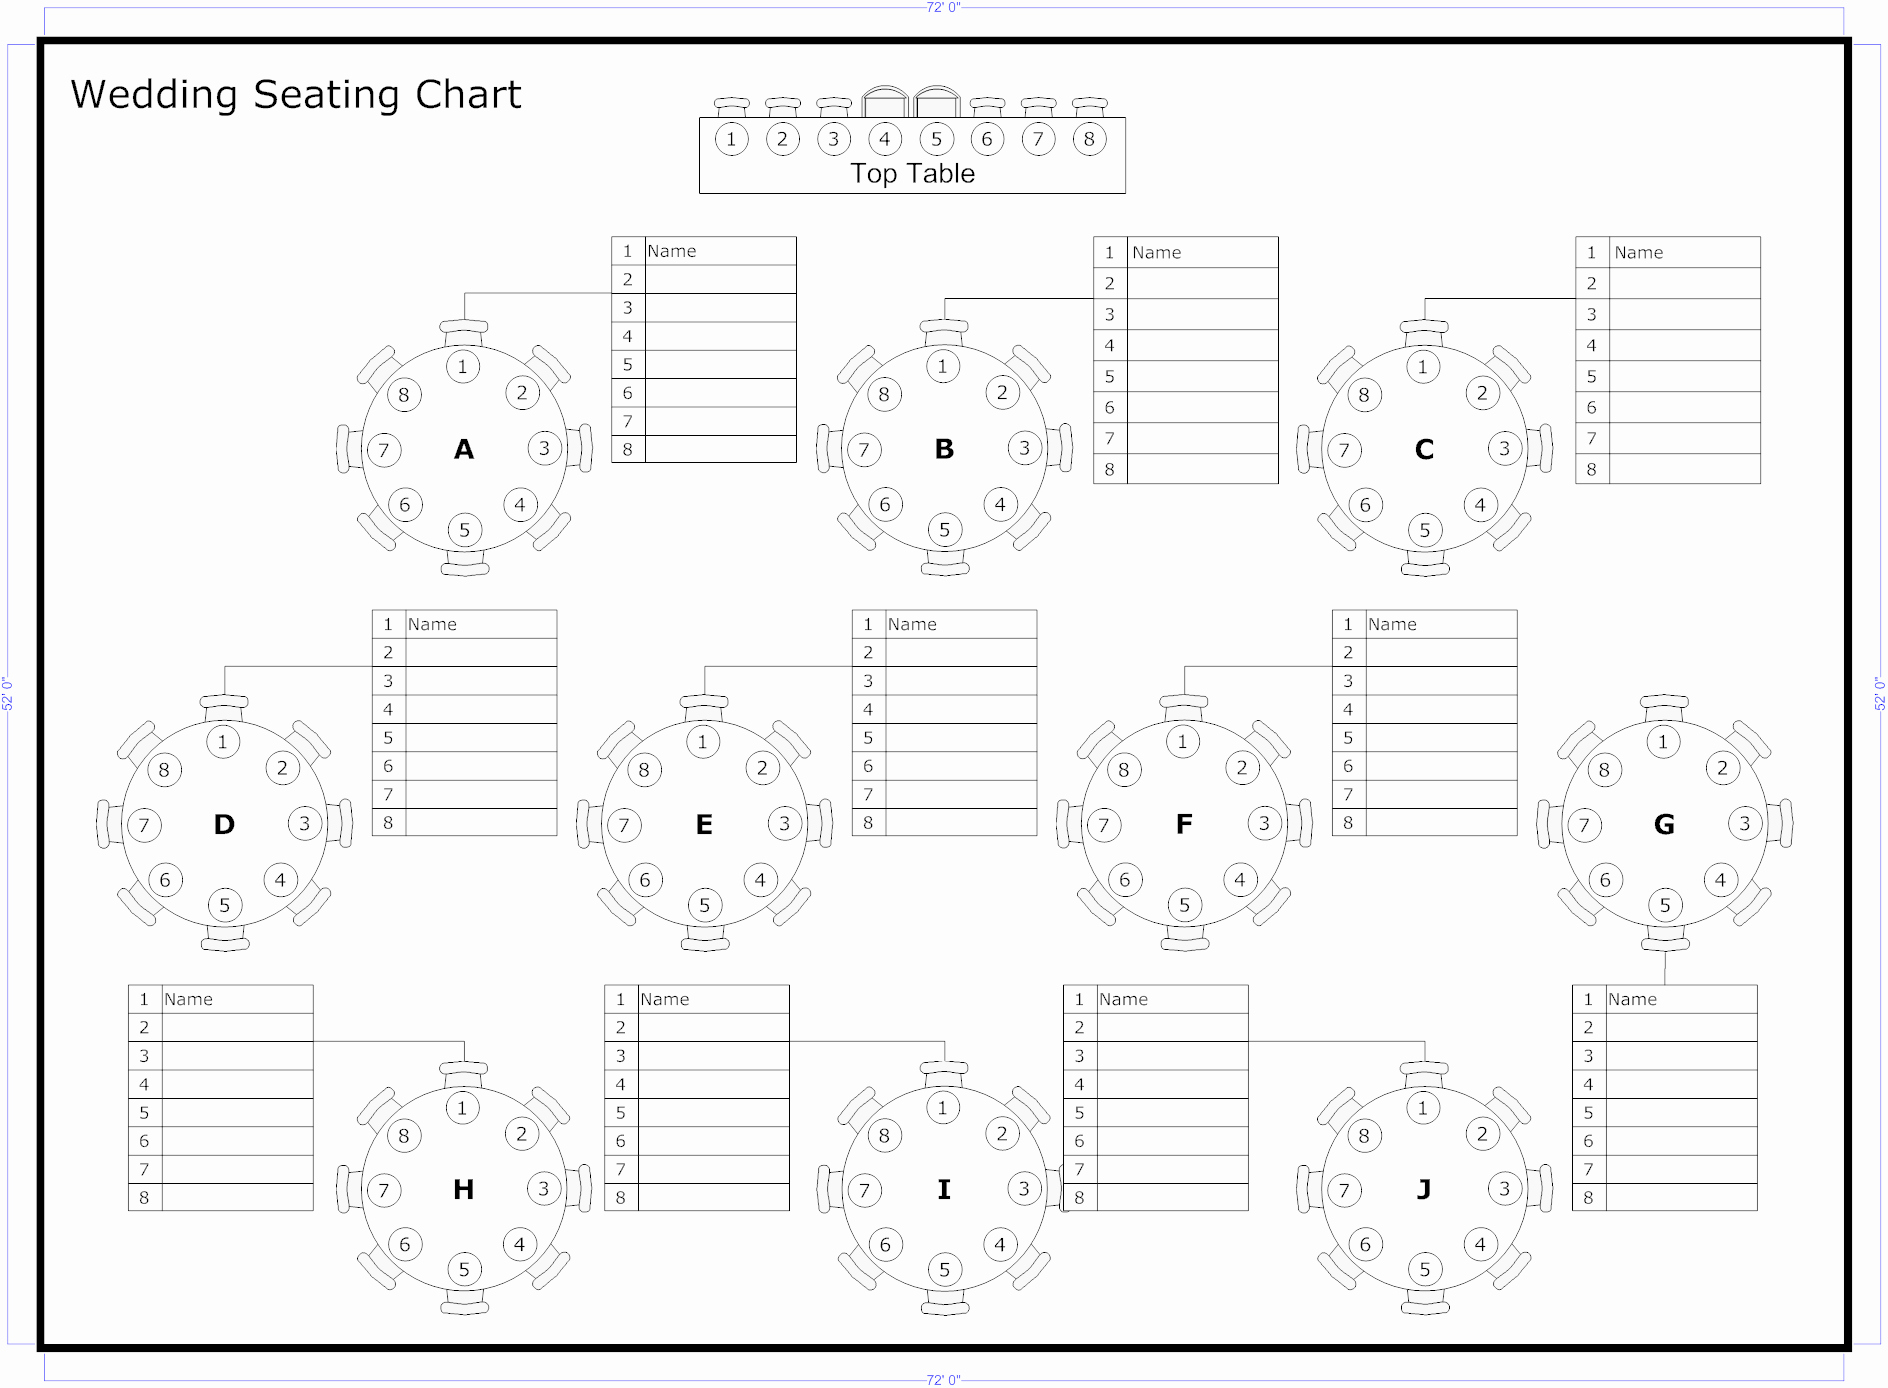 classroom seating chart template microsoft word unique tips to seat your wedding guests of classroom seating chart template microsoft word